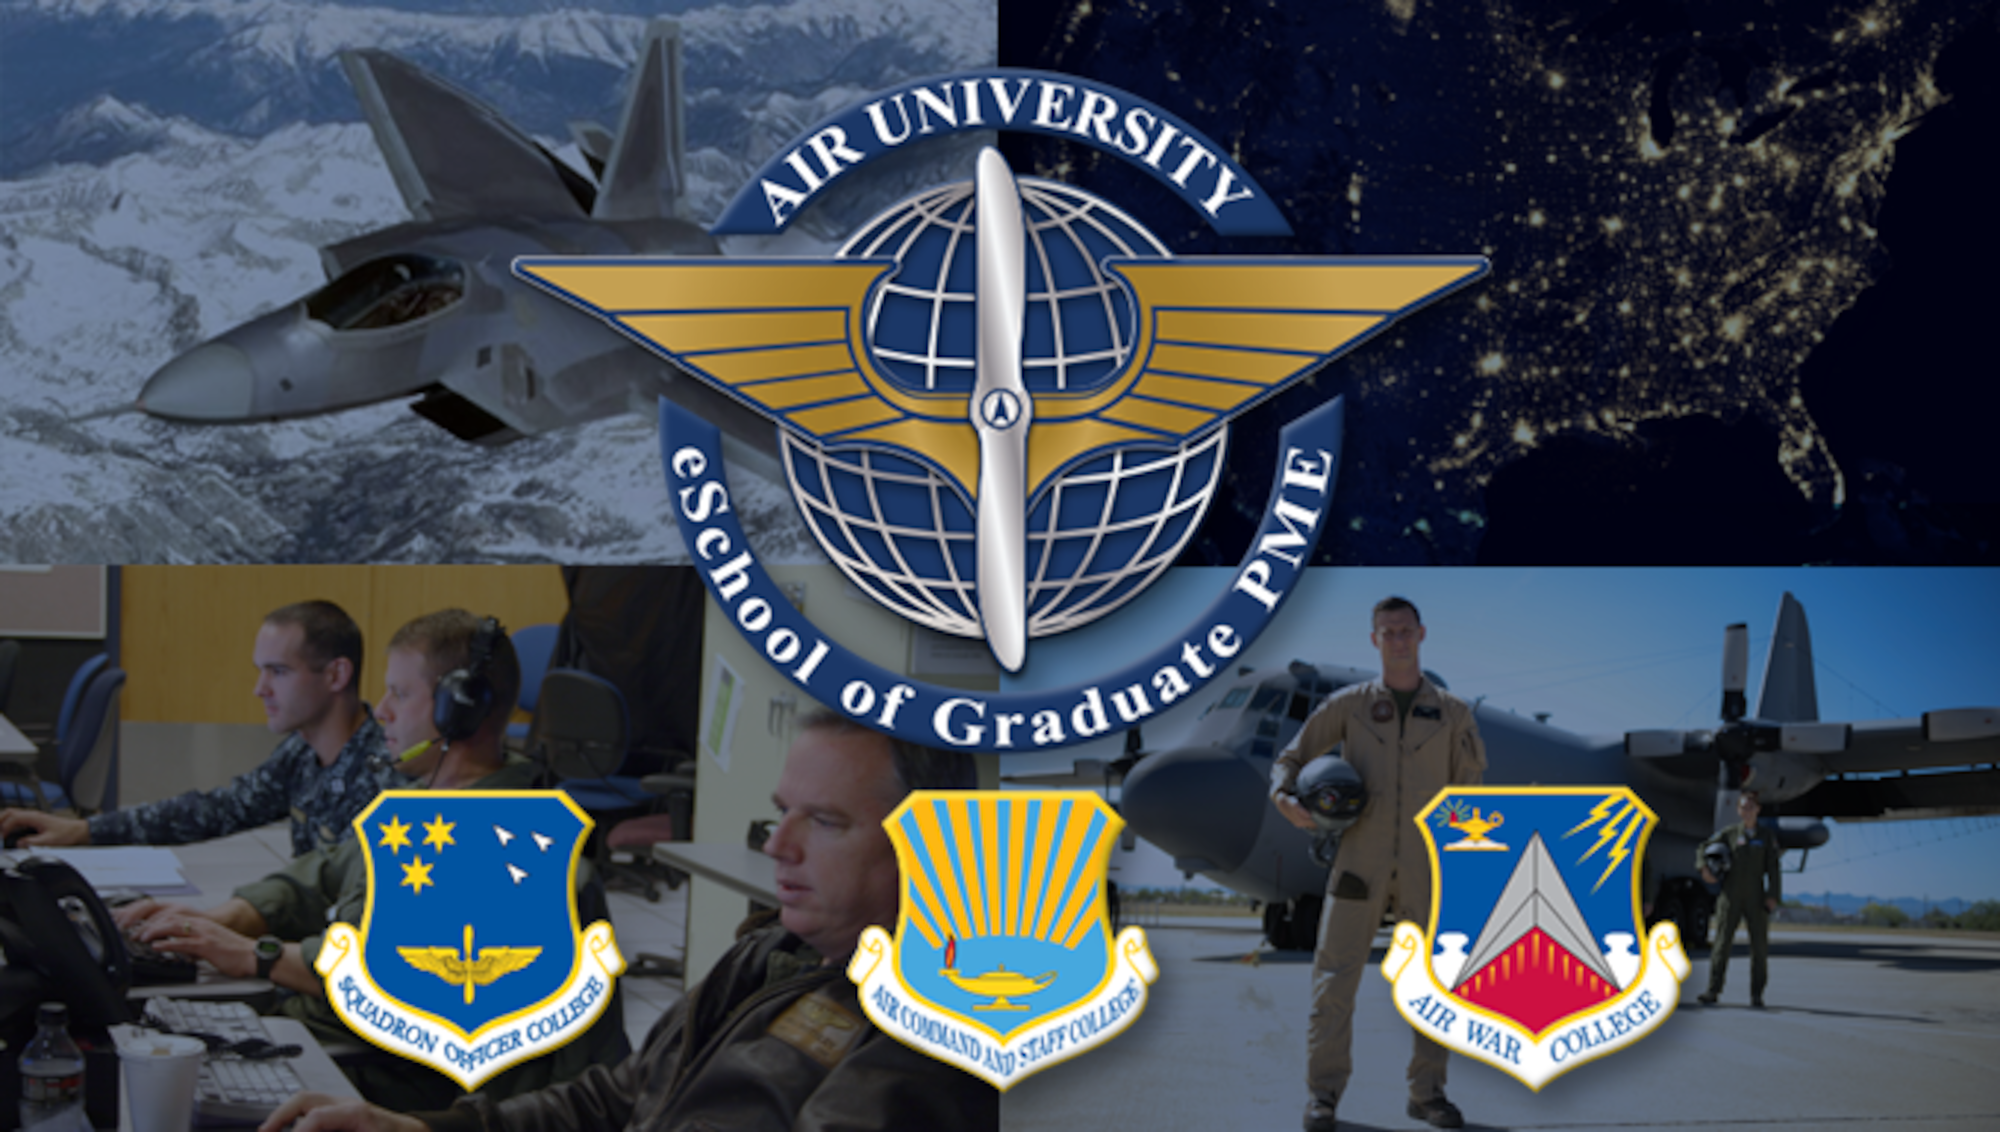 As a direct result of a massive 10-year transformational effort to revitalize officer professional military education distance learning programs, Air University formally stood up the eSchool of Graduate PME here on June 1, 2017.